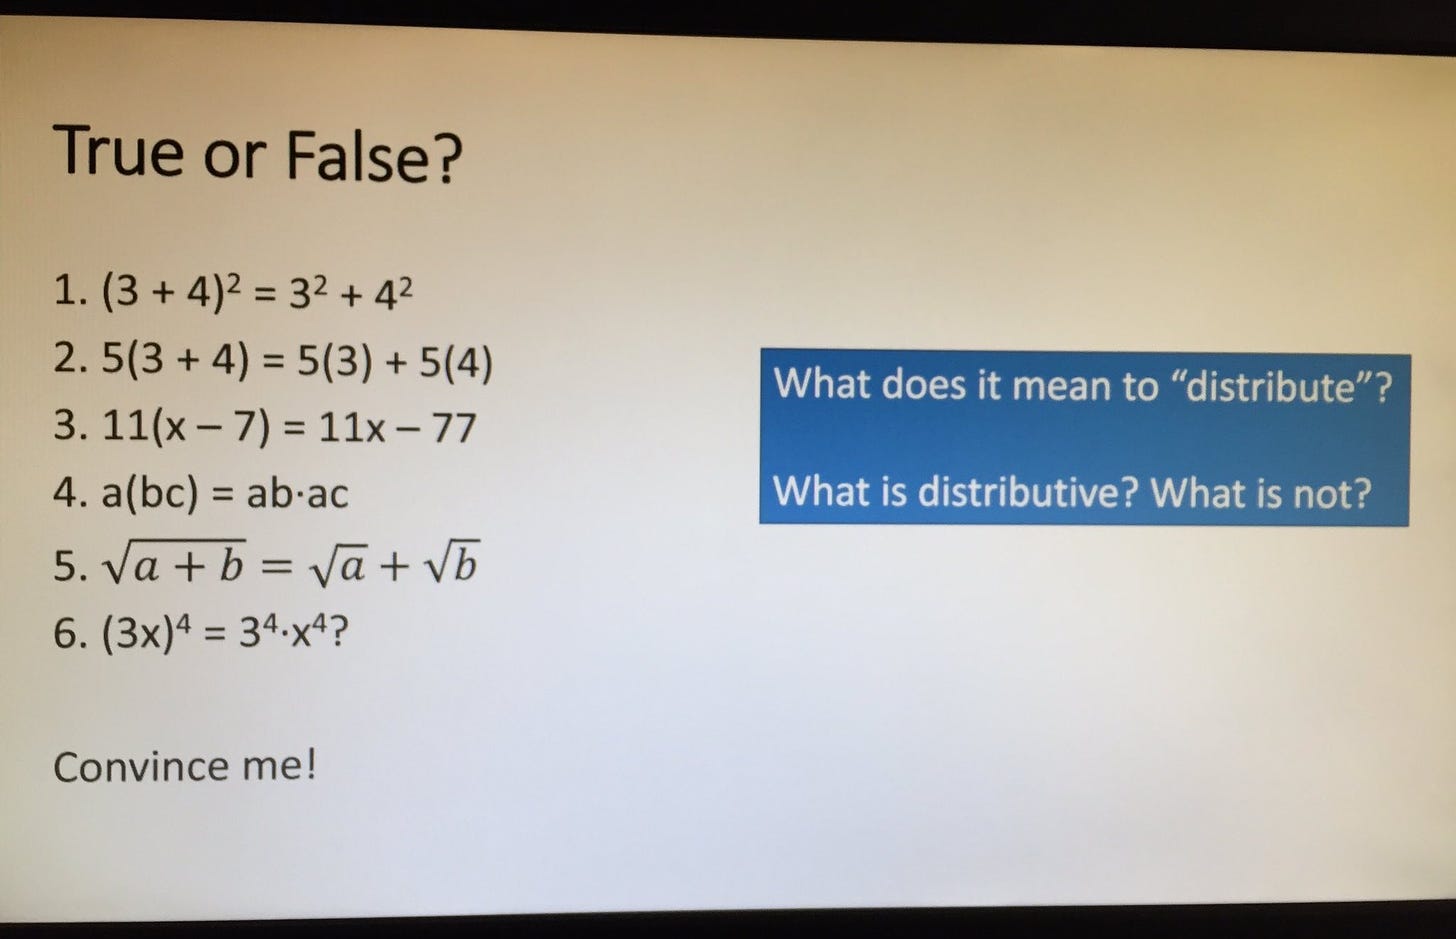 True or False? Then a series of statements of equivalence that invite students to decide if distribution works as they think it does across different operations.